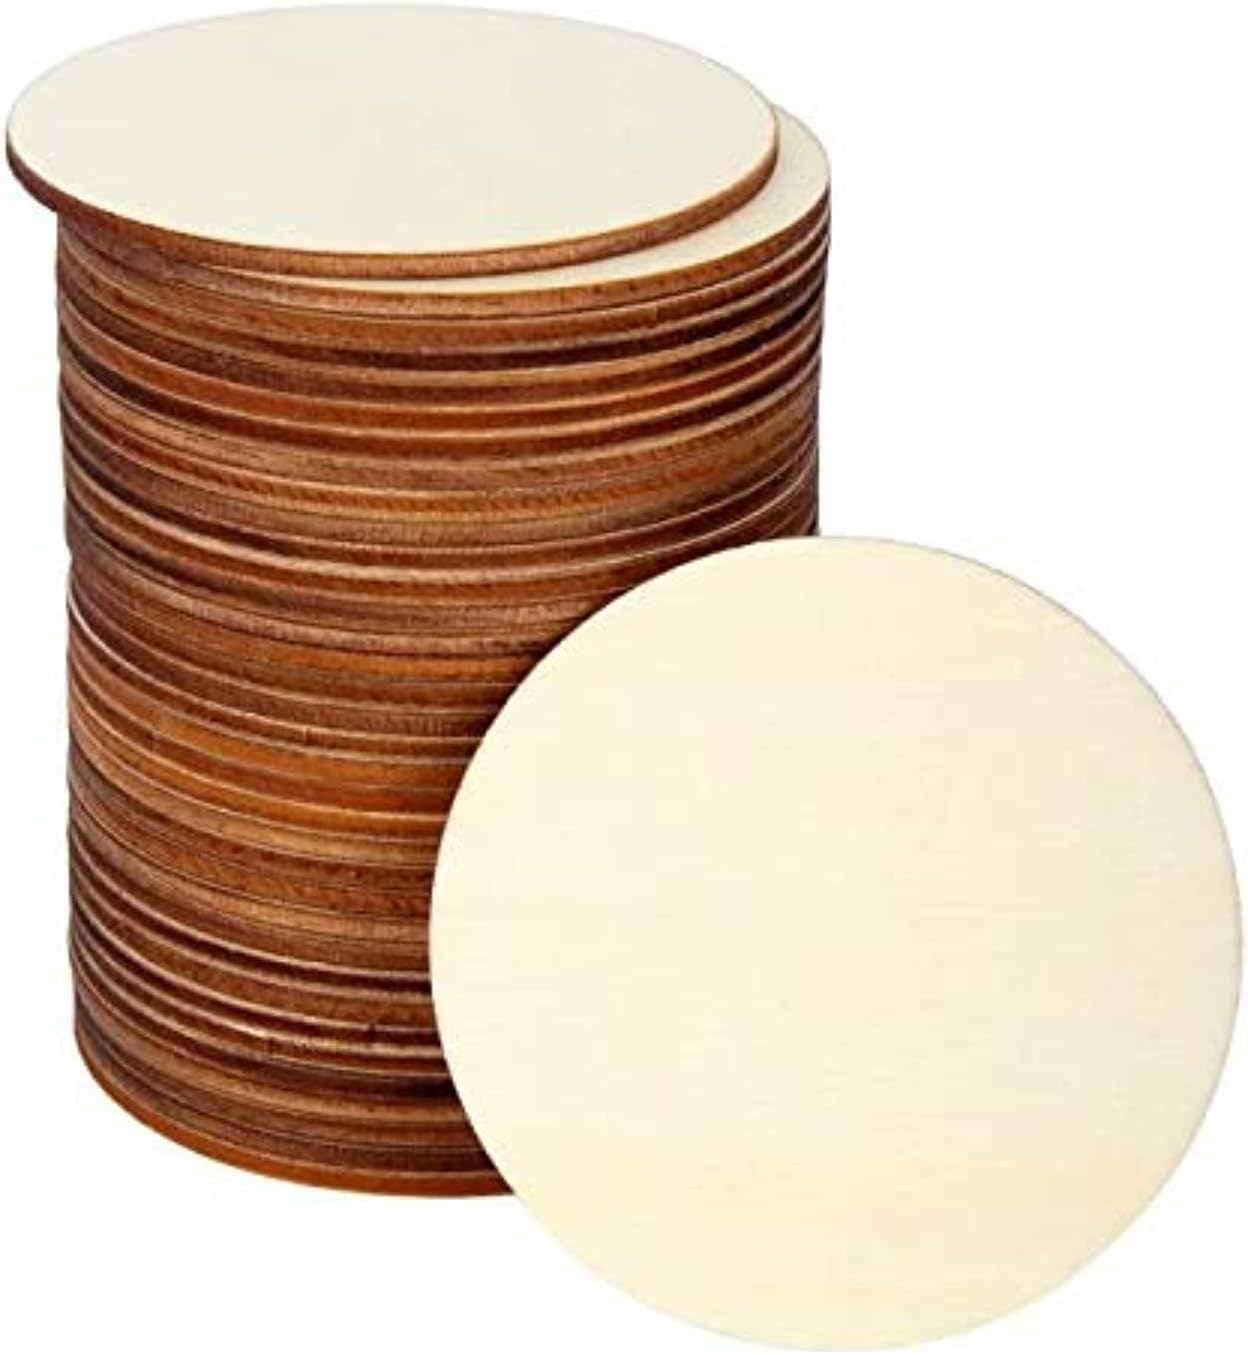 Blisstime 36 PCS 3 Inch Unfinished Wood Circles for Crafts, Wood Rounds for Crafts, Round Wood Discs for Crafts, Painting, Writing, DIY Supplies, Engraving and Carving, Home Decorations